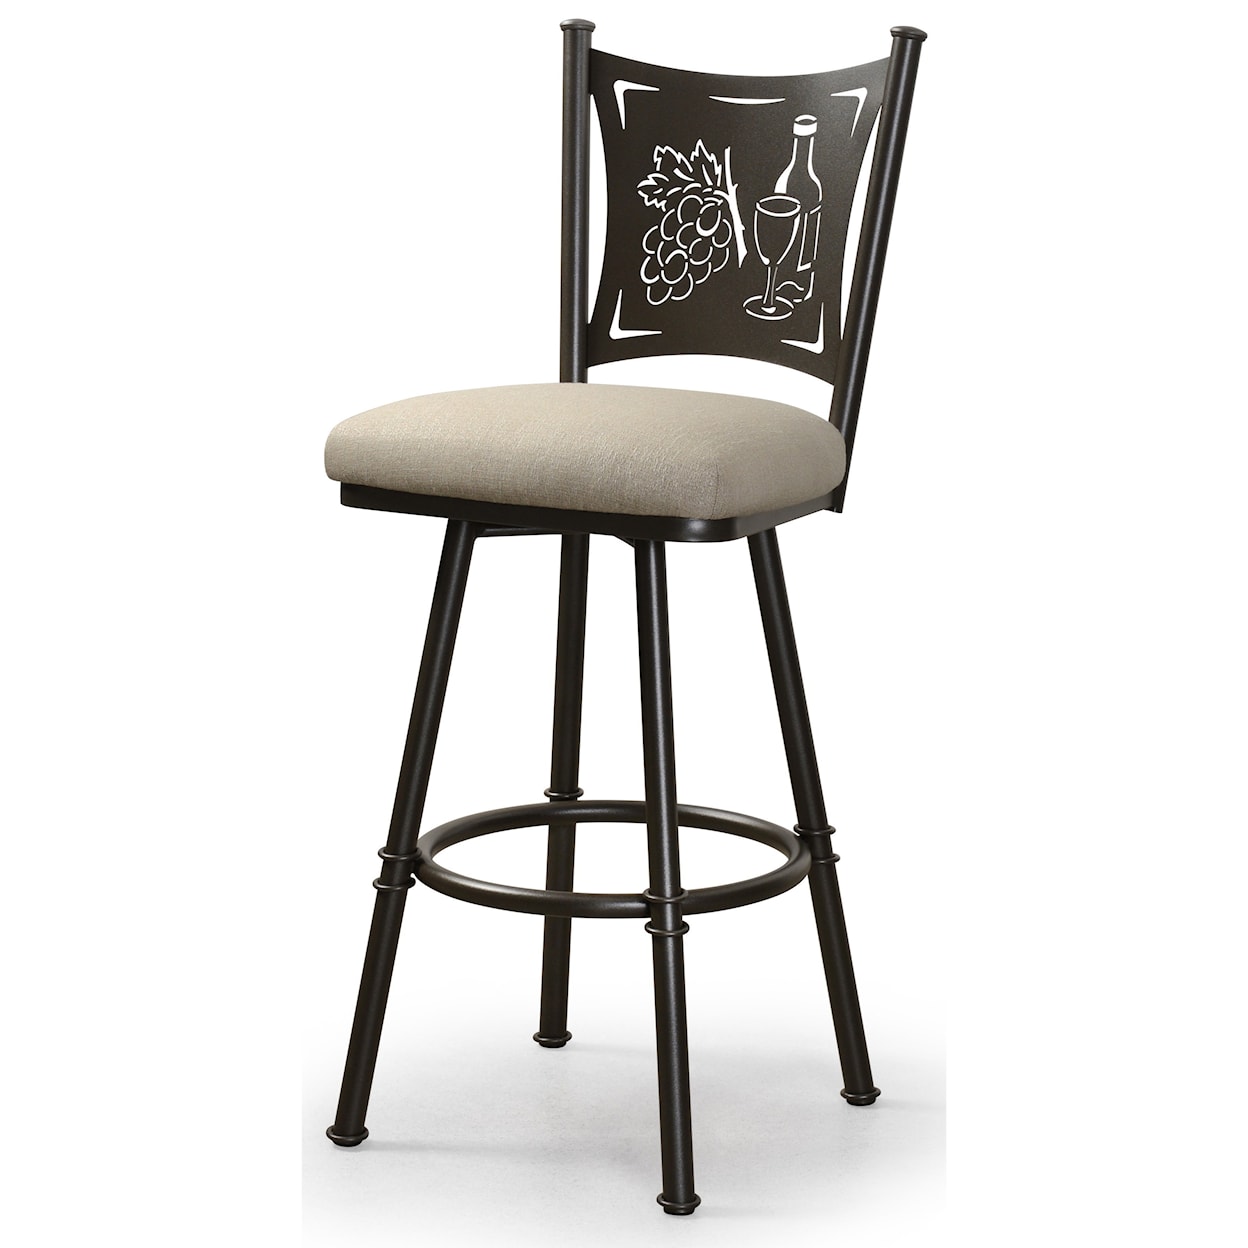 Trica Transitional Bar Stools Creation Collection I Bar Stool